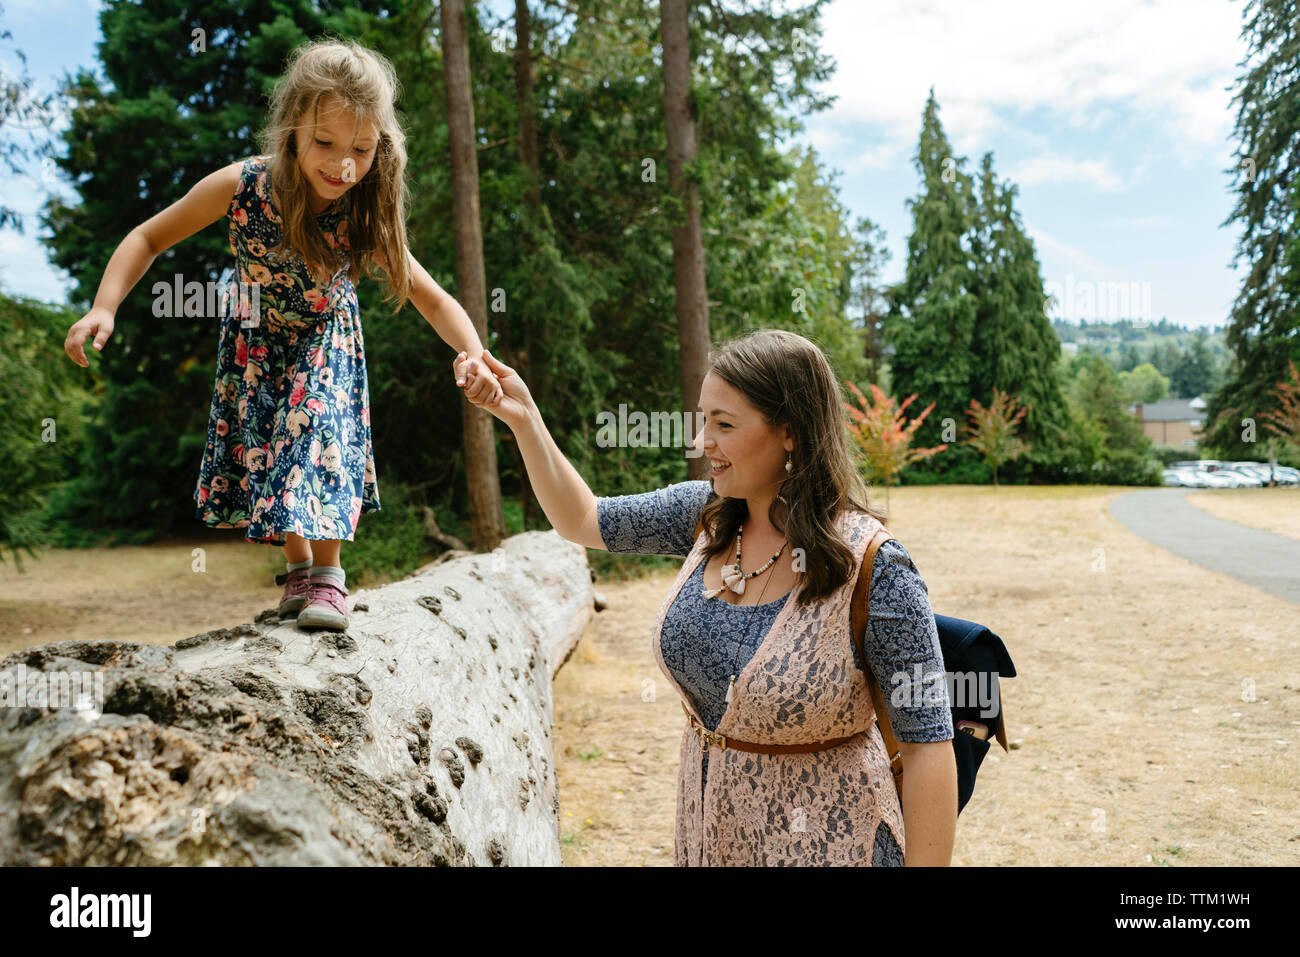 Mother assisting cute daughter in walking on log against trees at forest Stock Photo